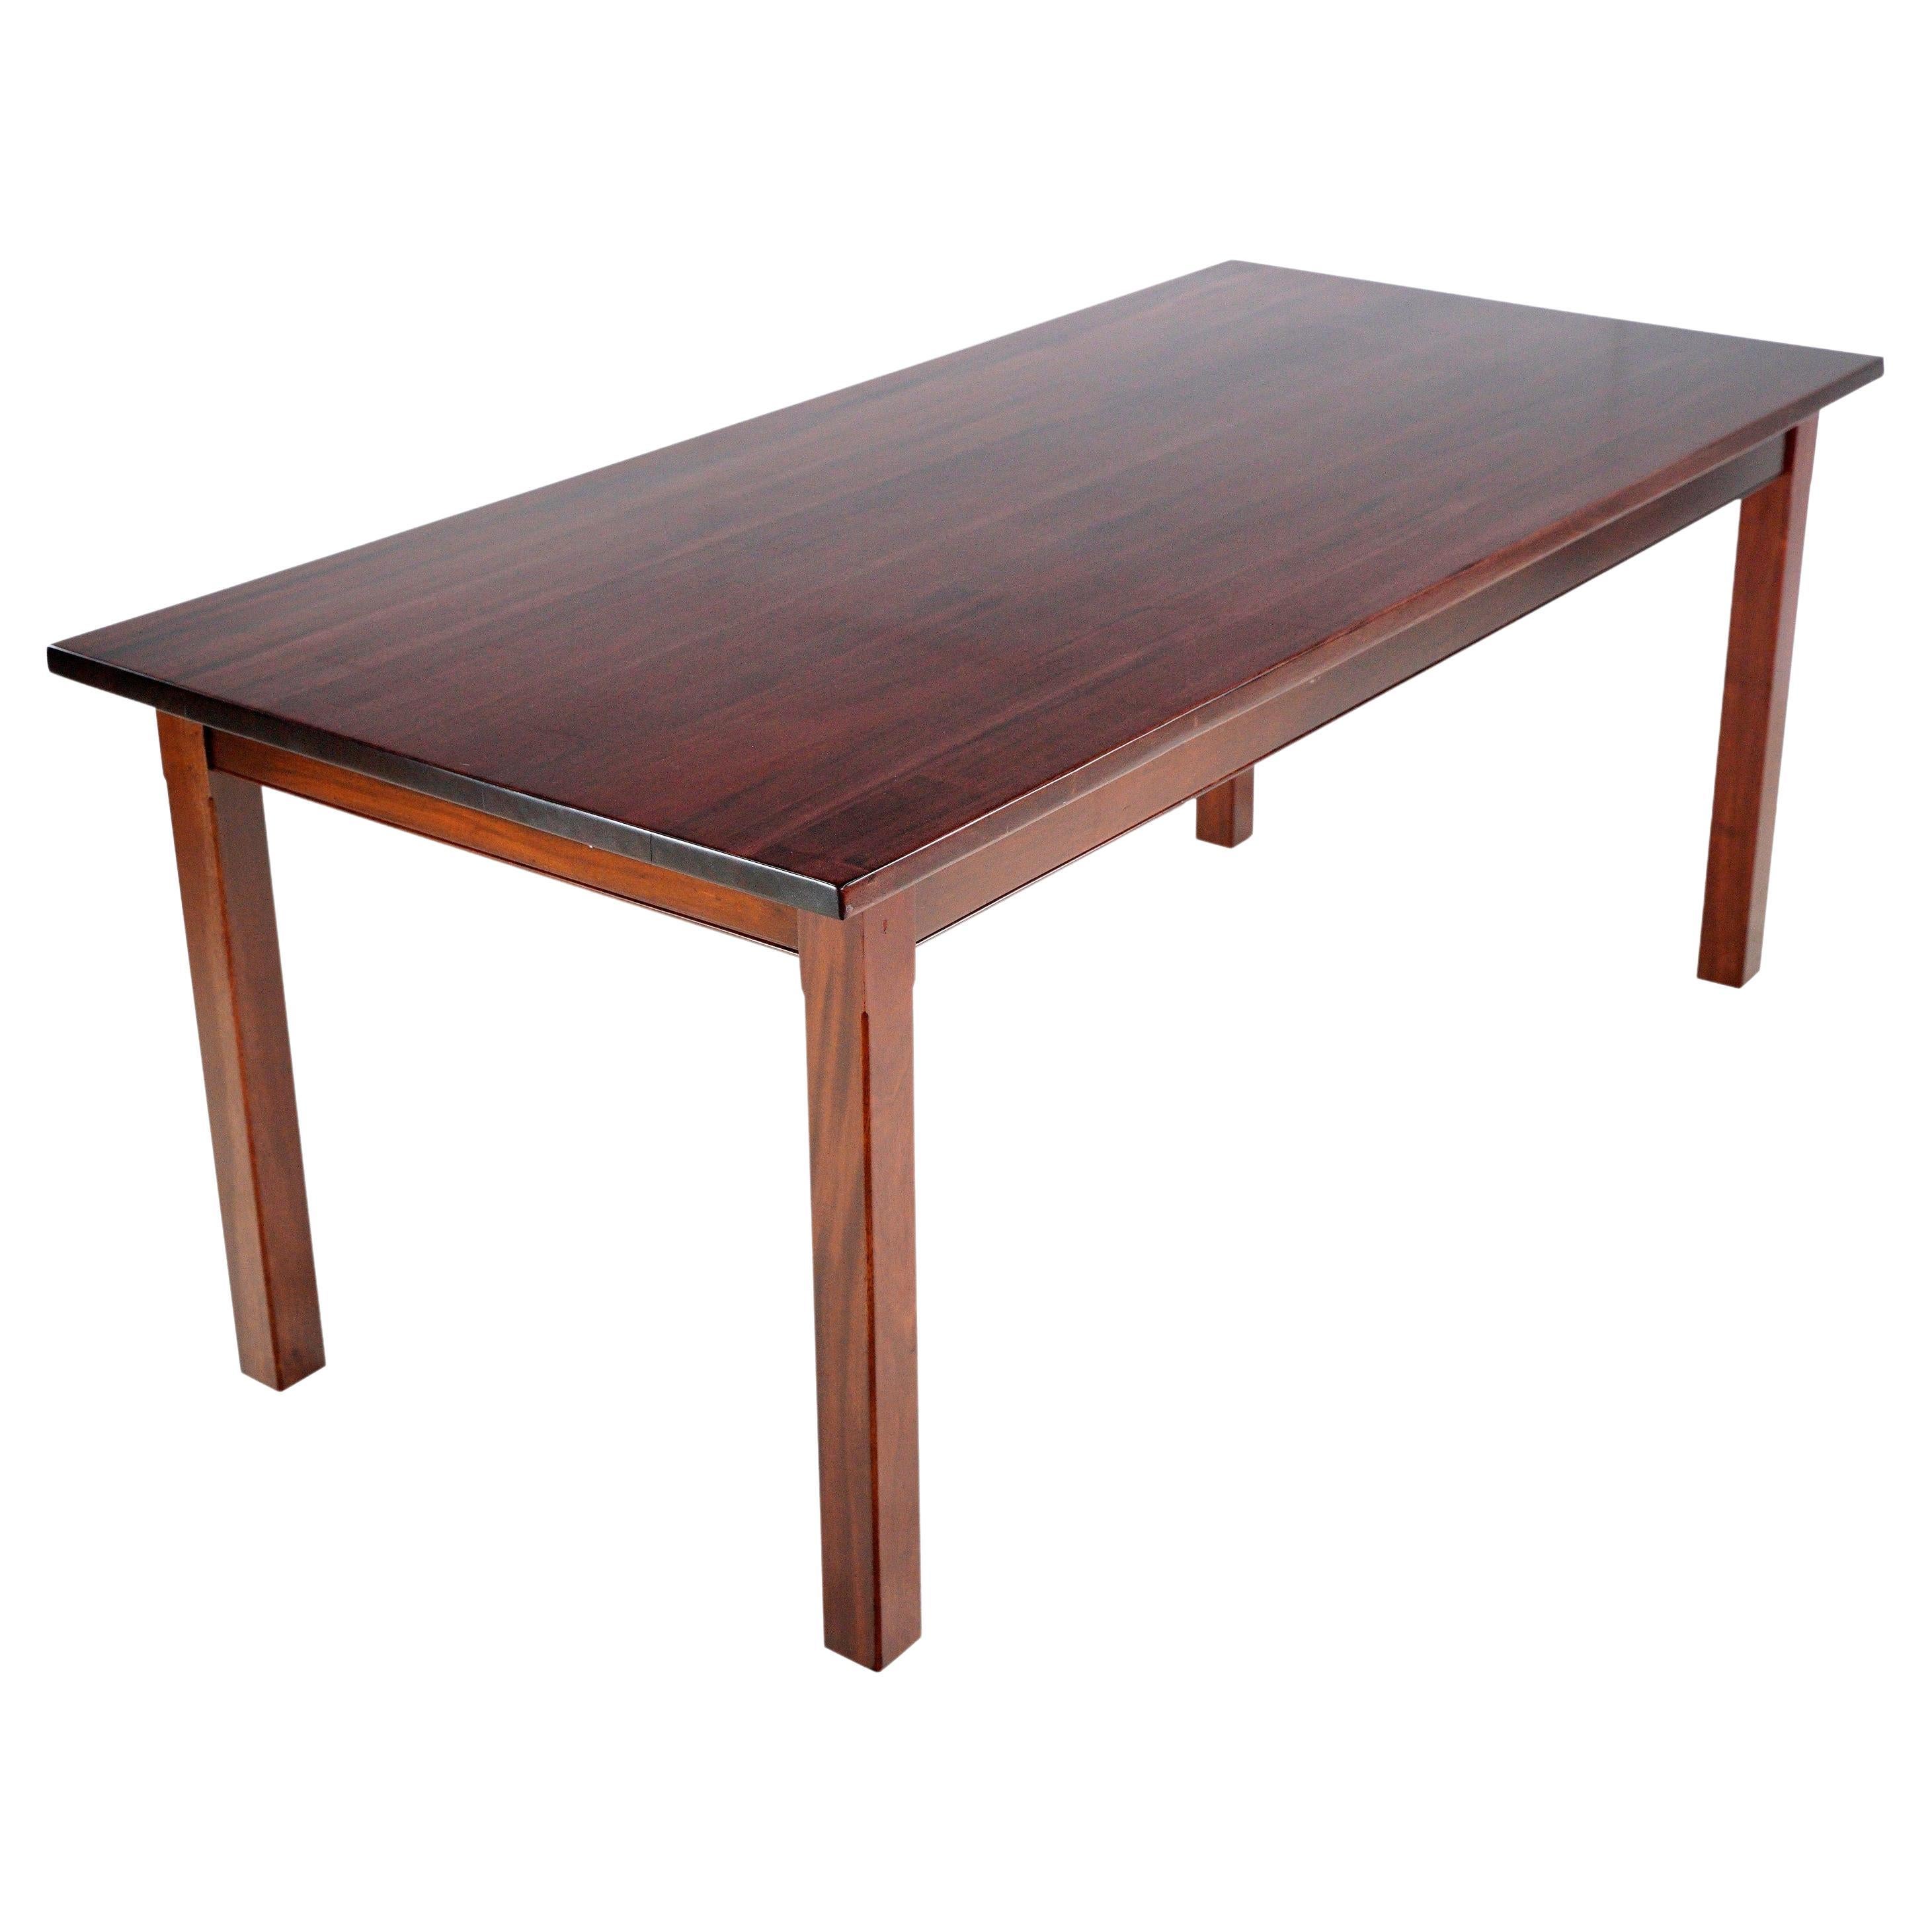 8 ft Mahogany Dining Room Table w Square Legs